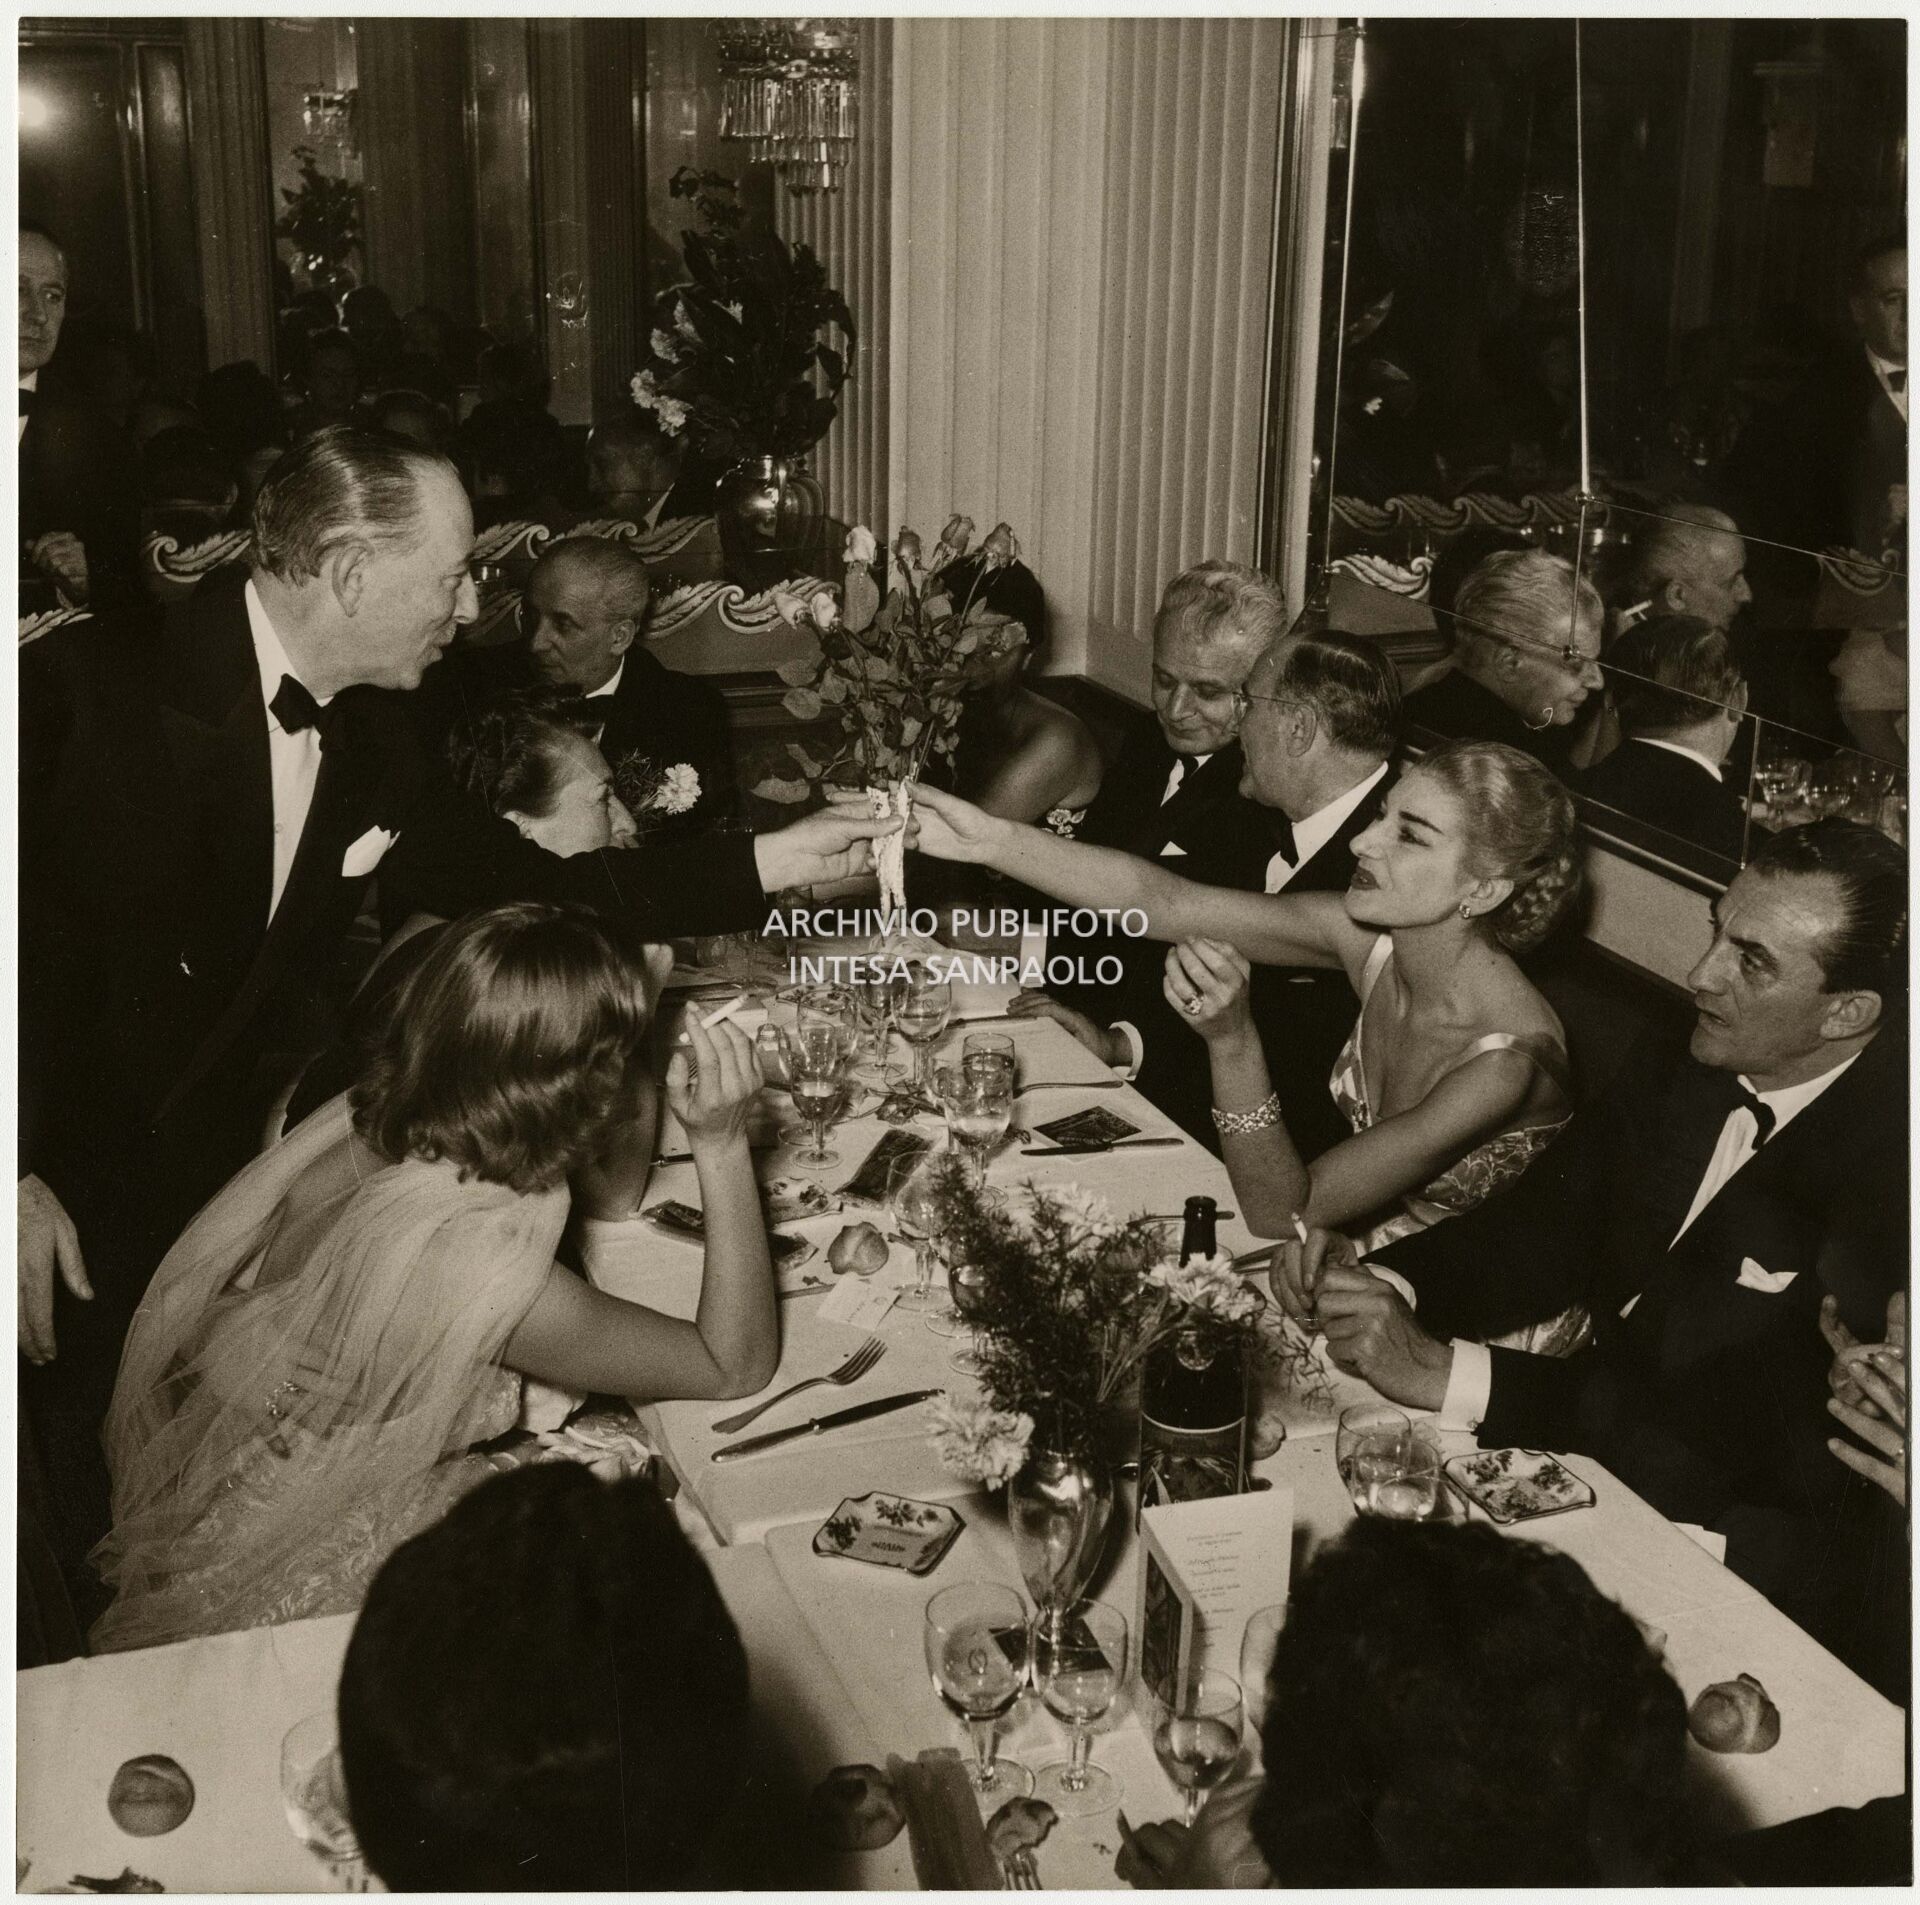 Maria Callas receives a bouquet of flowers from Valentino Bompiani, at the Savini restaurant, on the evening of the premiere of La Vestale by Gaspare Spontini. To her left, we see the director Luchino Visconti, while her husband Giovanni Battista Meneghini is at the head of the table with the superintendent of La Scala, Antonio Ghiringhelli, seated to his left.